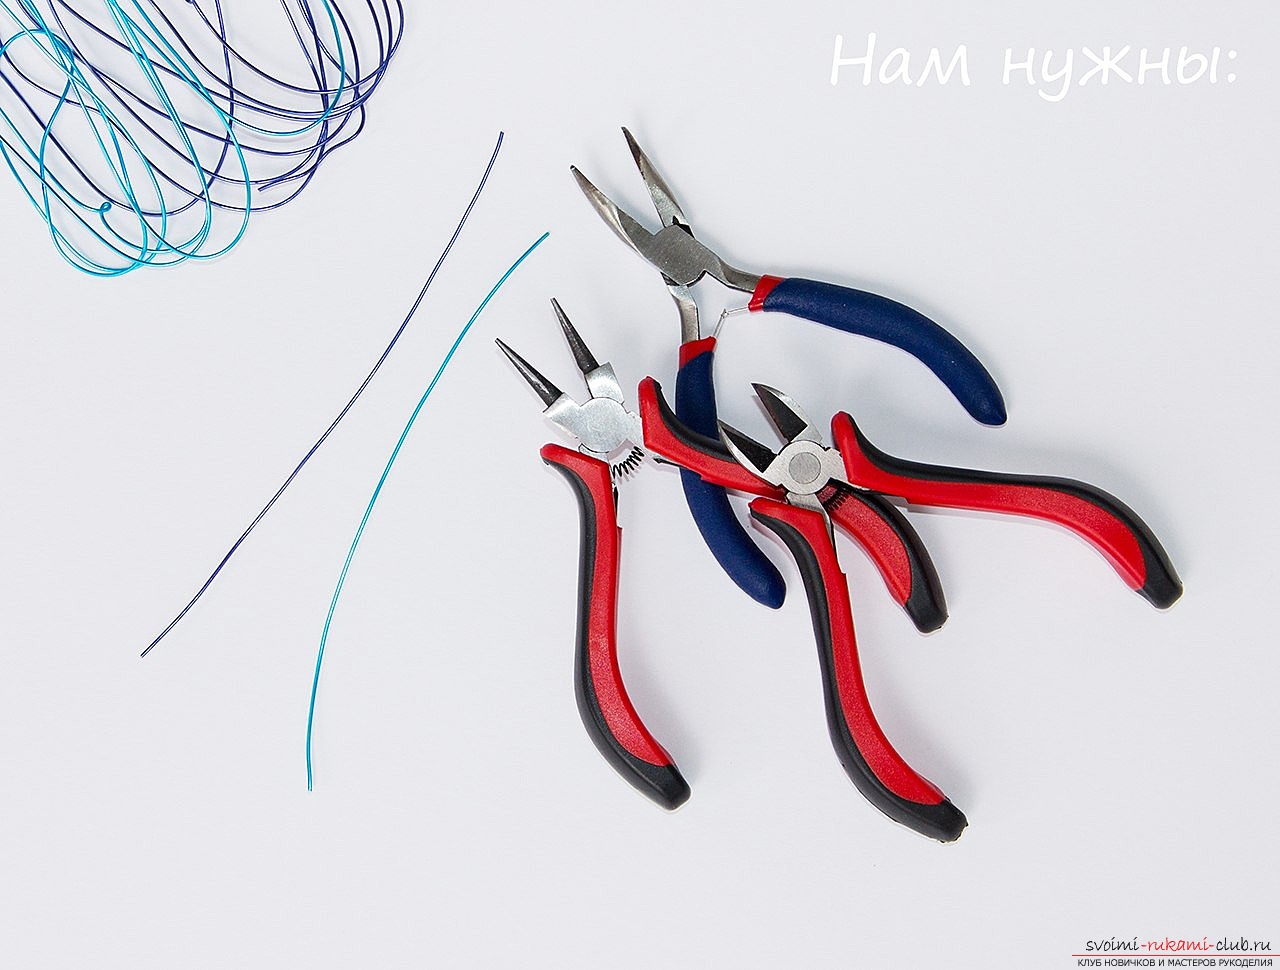 We make kafe with our own hands, nice cuffs for ears made of wire. Decoration among varieties of earrings .. Photo №1